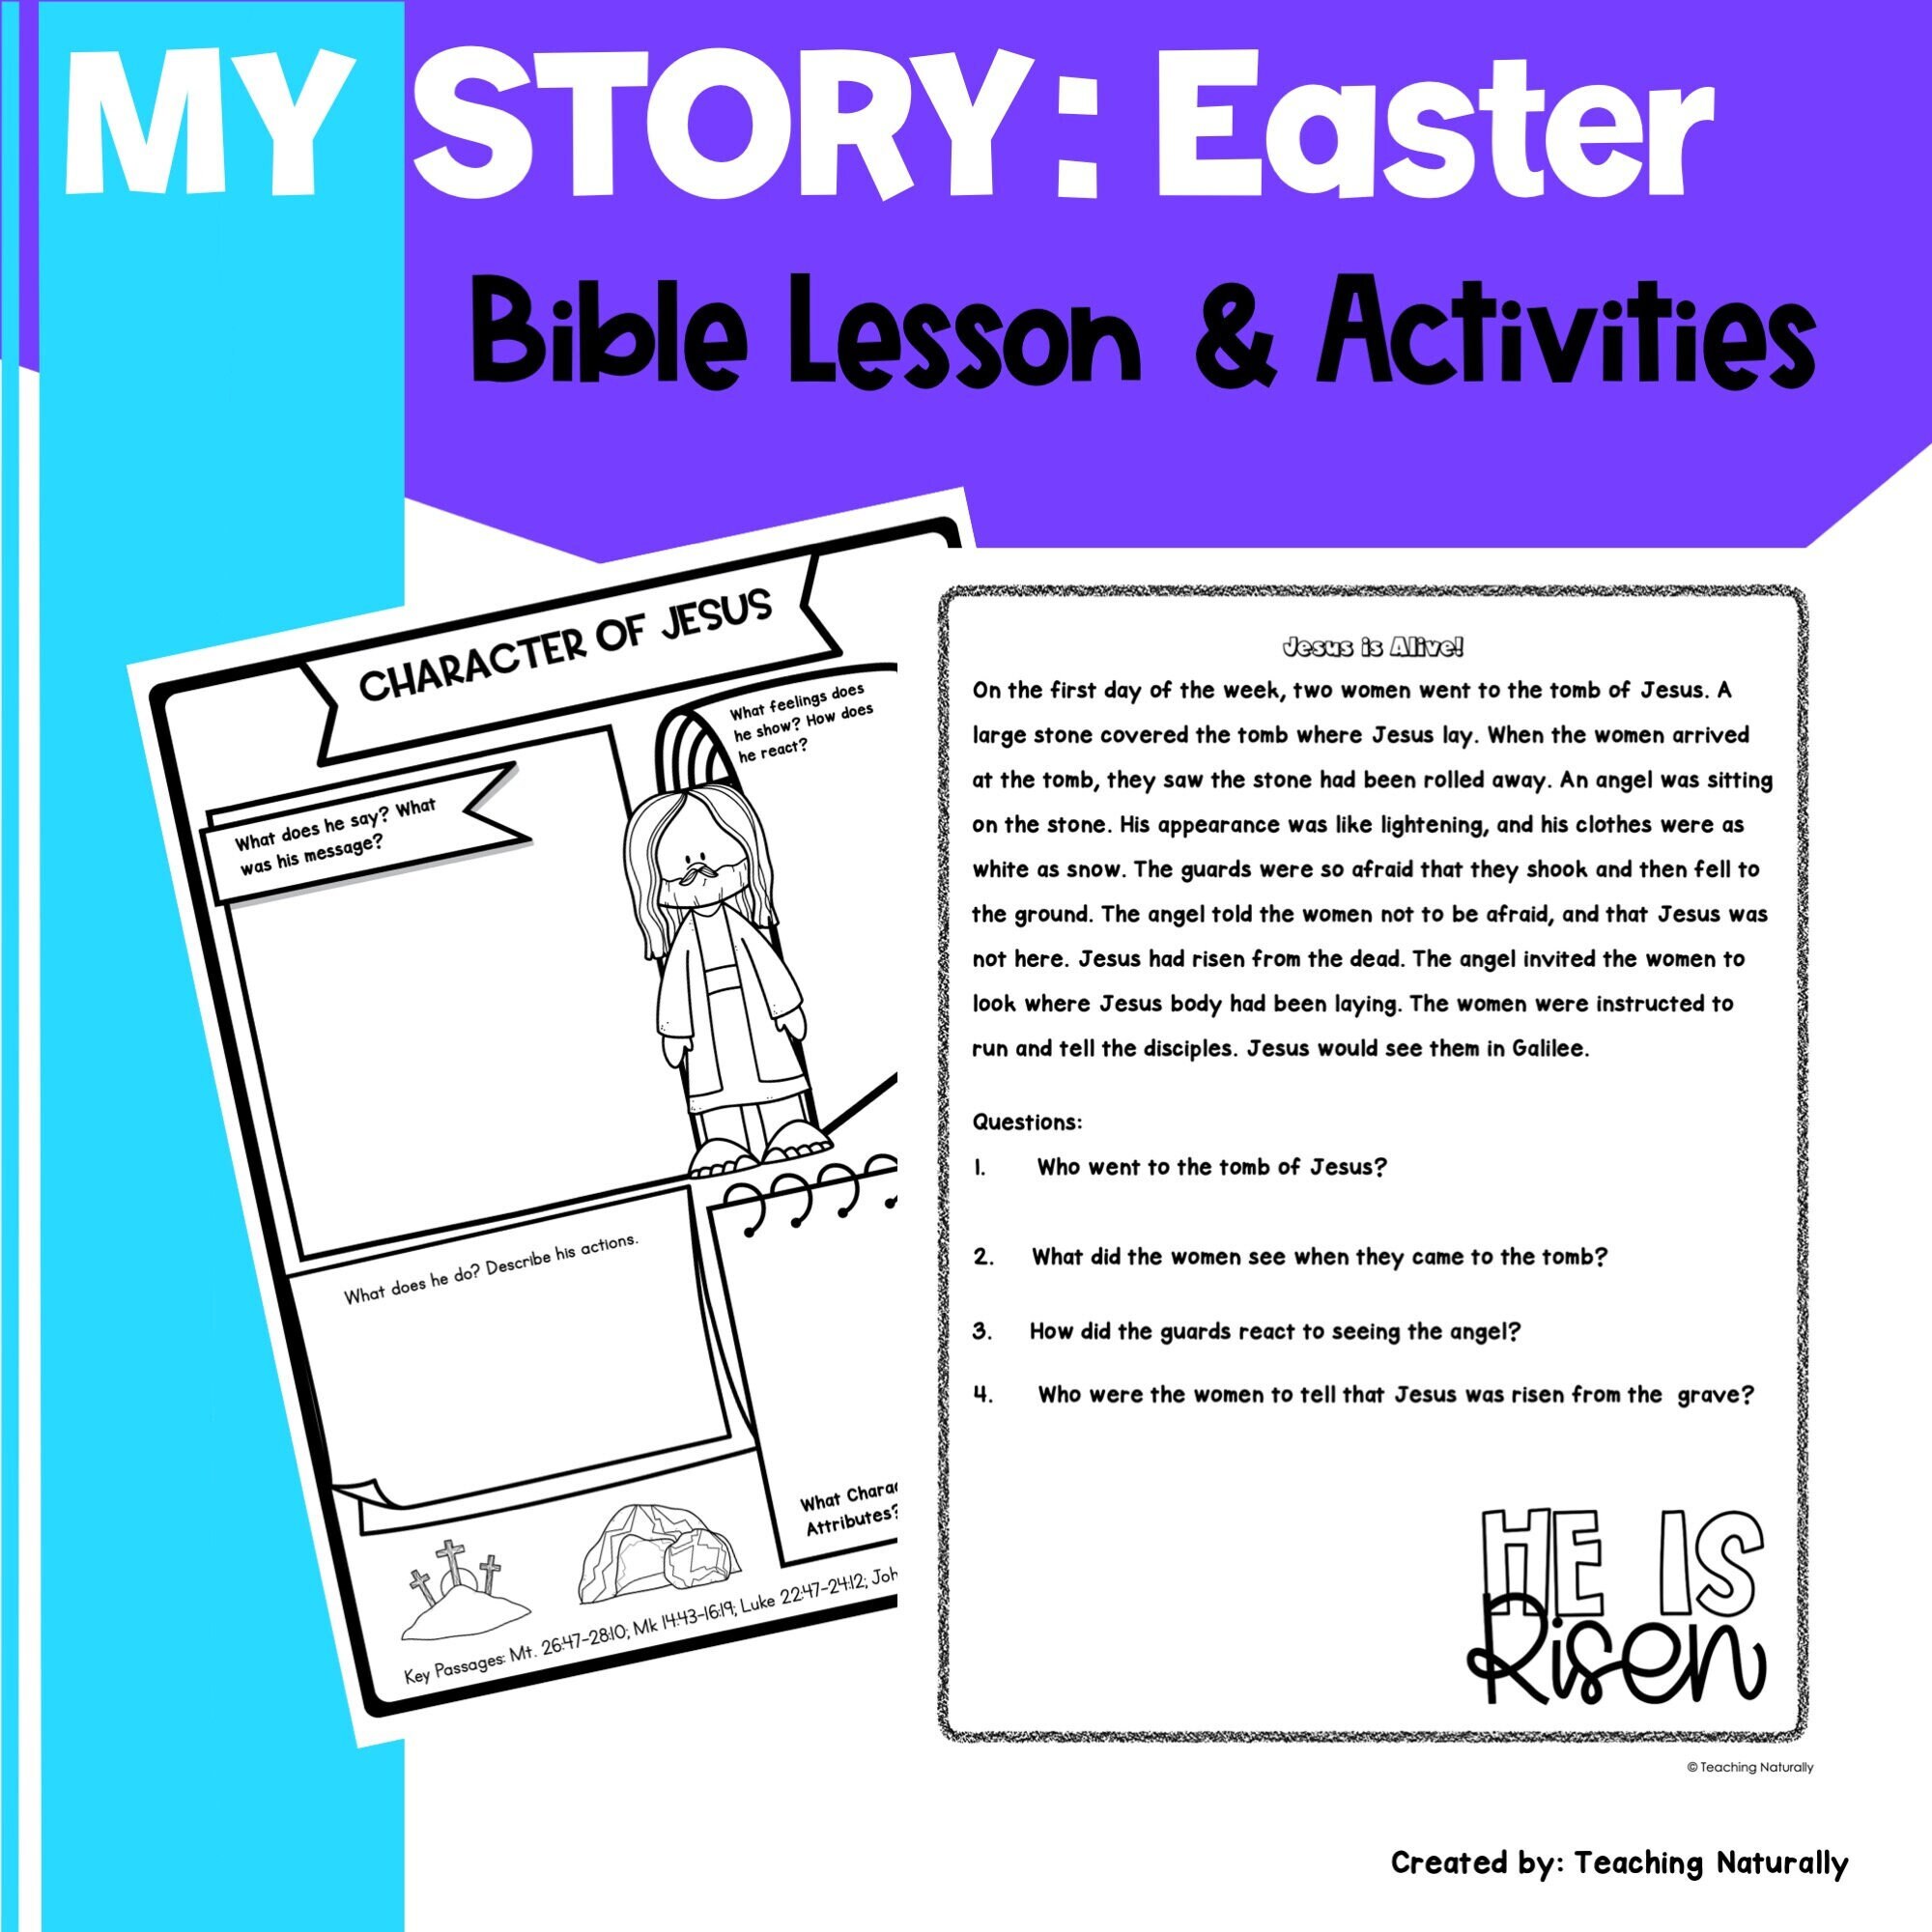 Easter Bible Lesson Activities for Kids sunday School Lesson - Etsy